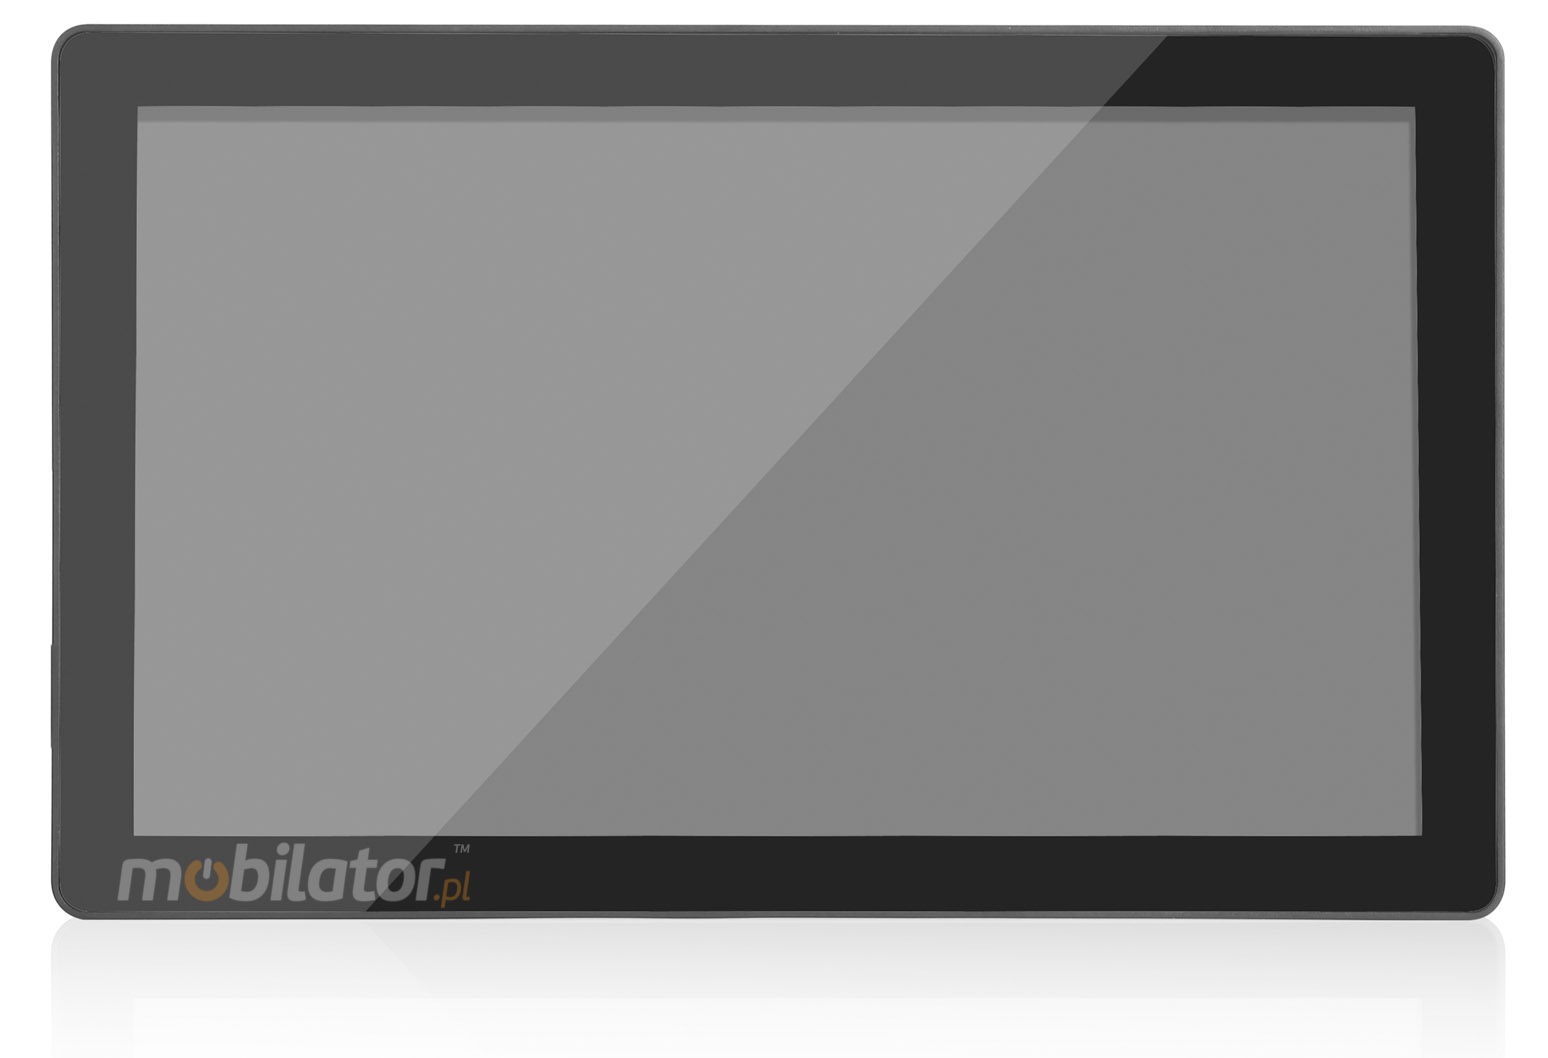 Mobilator Flat Design PCAP CTPC156RD3 IP 65 Fanless Touch PC, LED panel, 10 points touch screen, built-in WIFI, 12V DC input